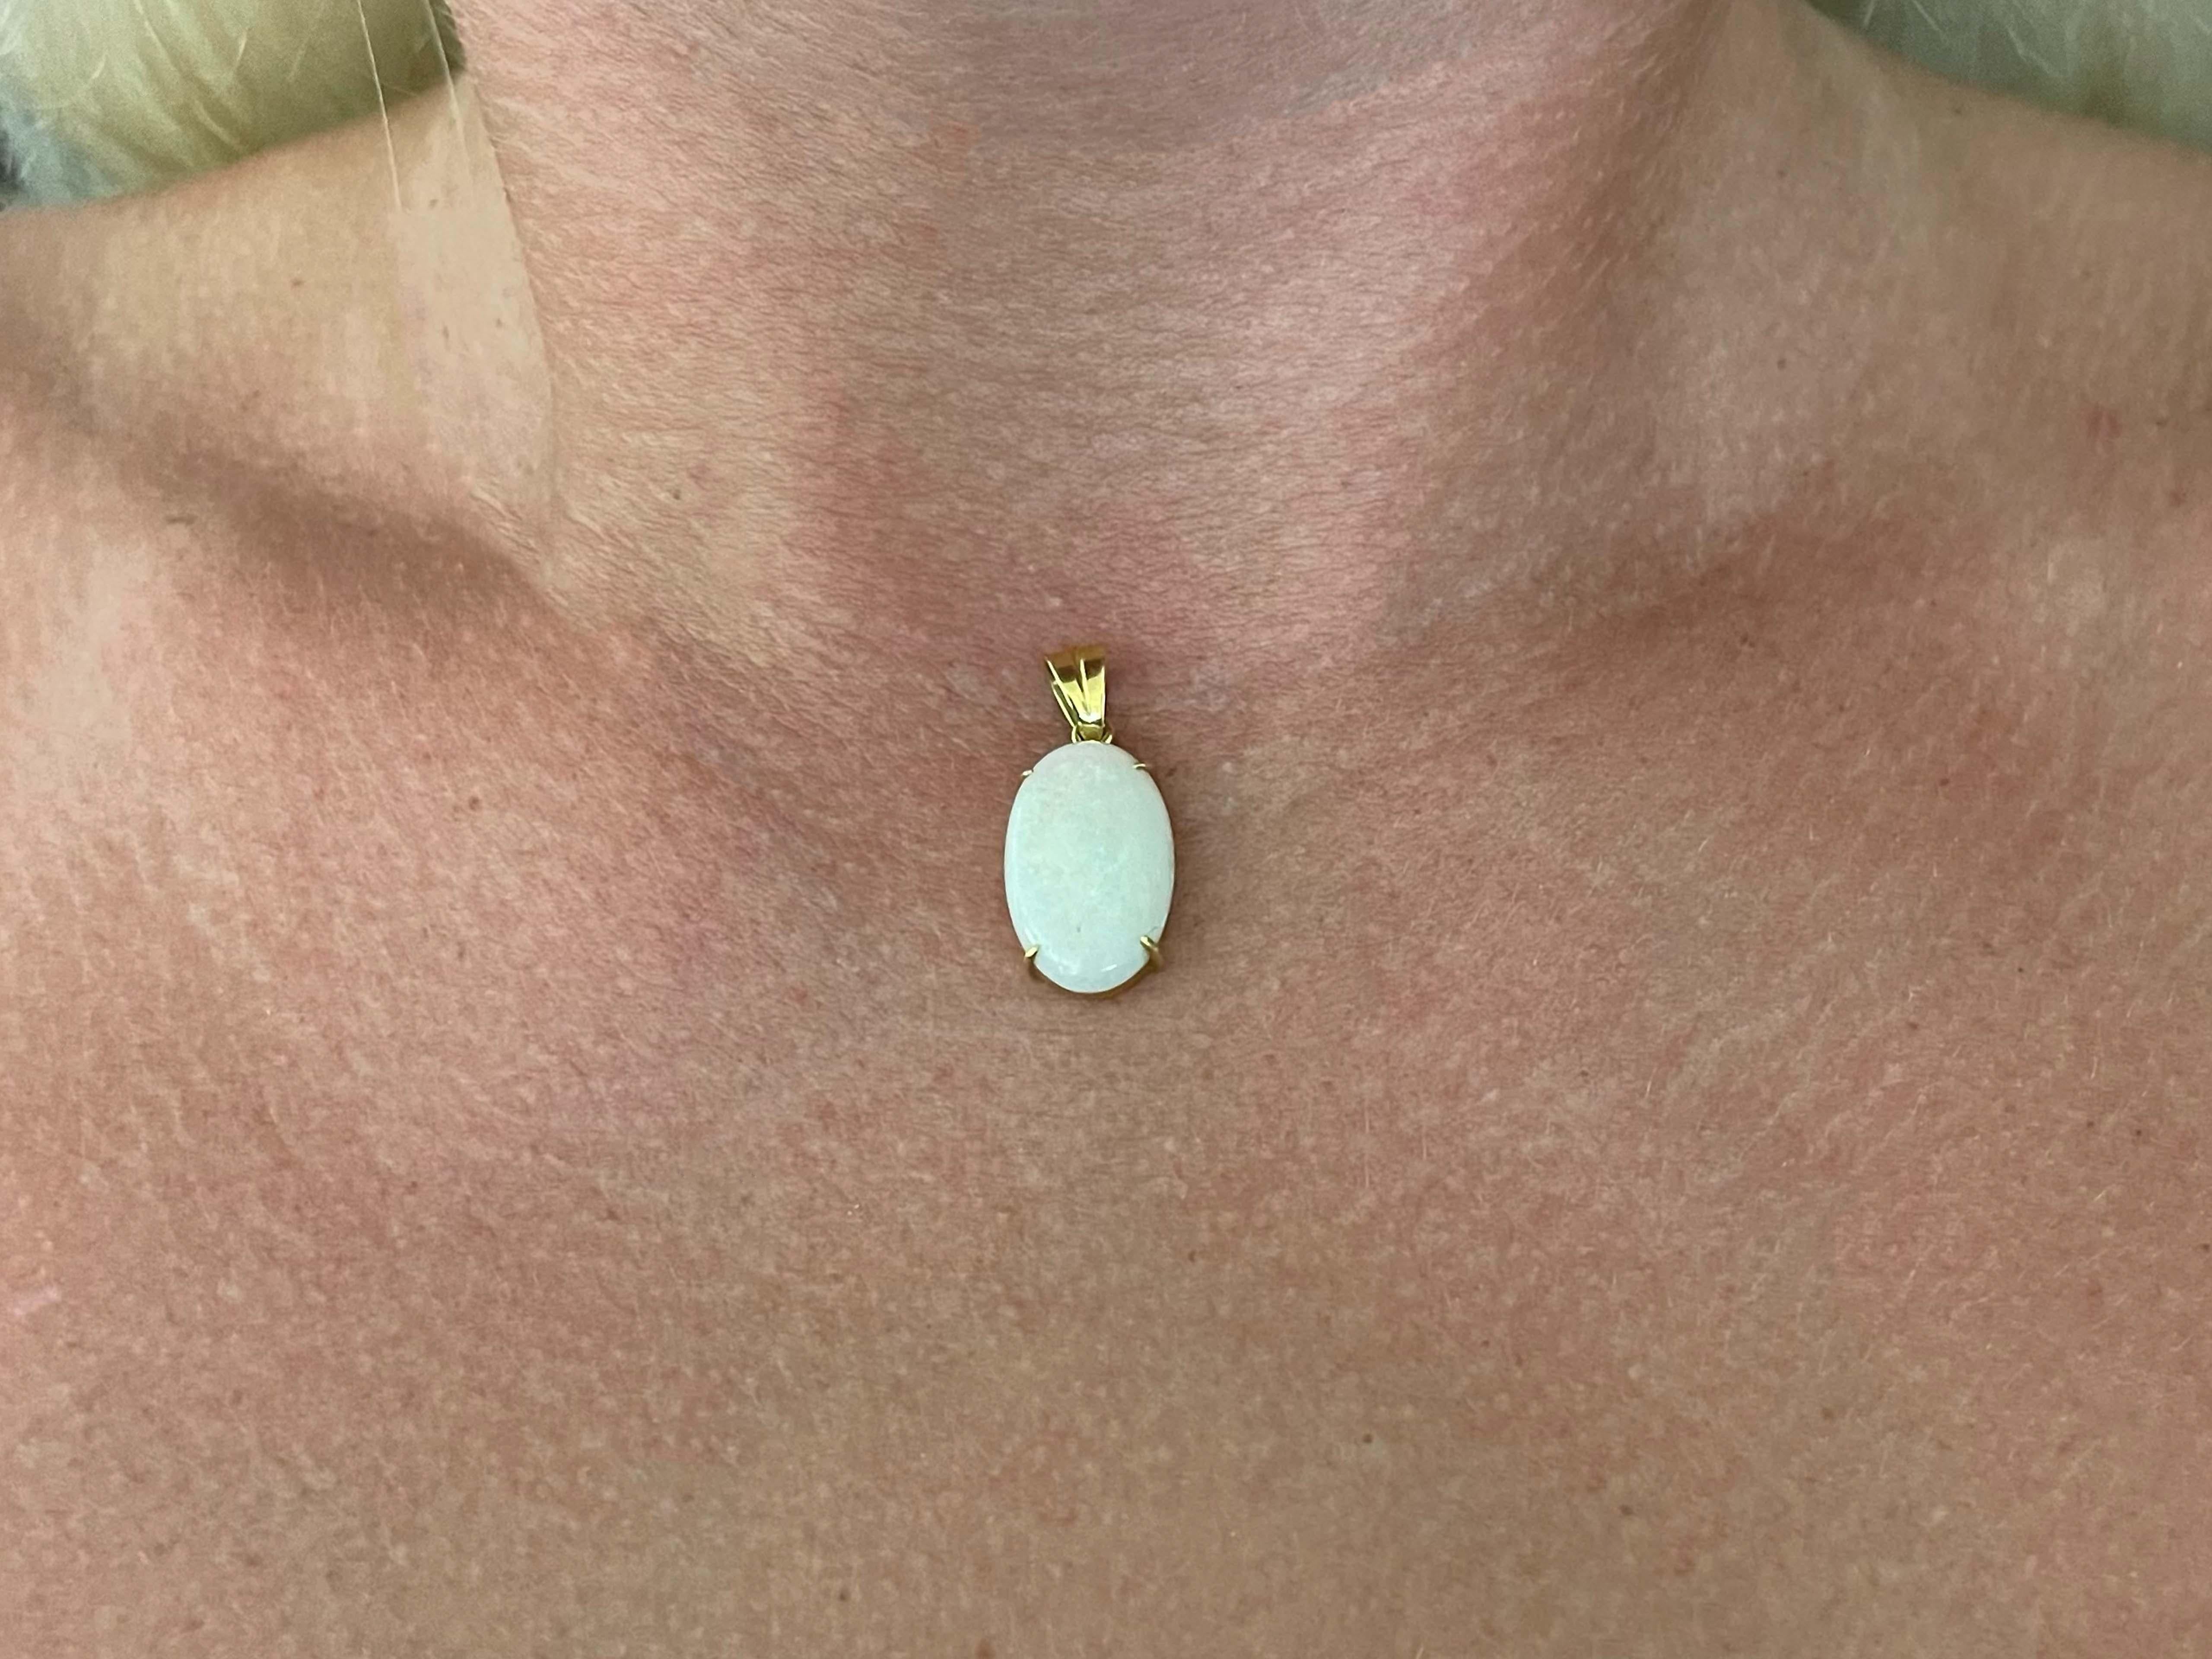 Item Specifications:

Metal: 18K Yellow Gold

Style: Opal Pendant

Total Weight: 2.3 Grams

Gemstone Specifications:

Center Gemstone: Opal

Gemstone Measurements: 19.2 mm x 11.7 mm x 4 mm
​
​Opal Carat Weight:  ~5 carats

Condition: Excellent